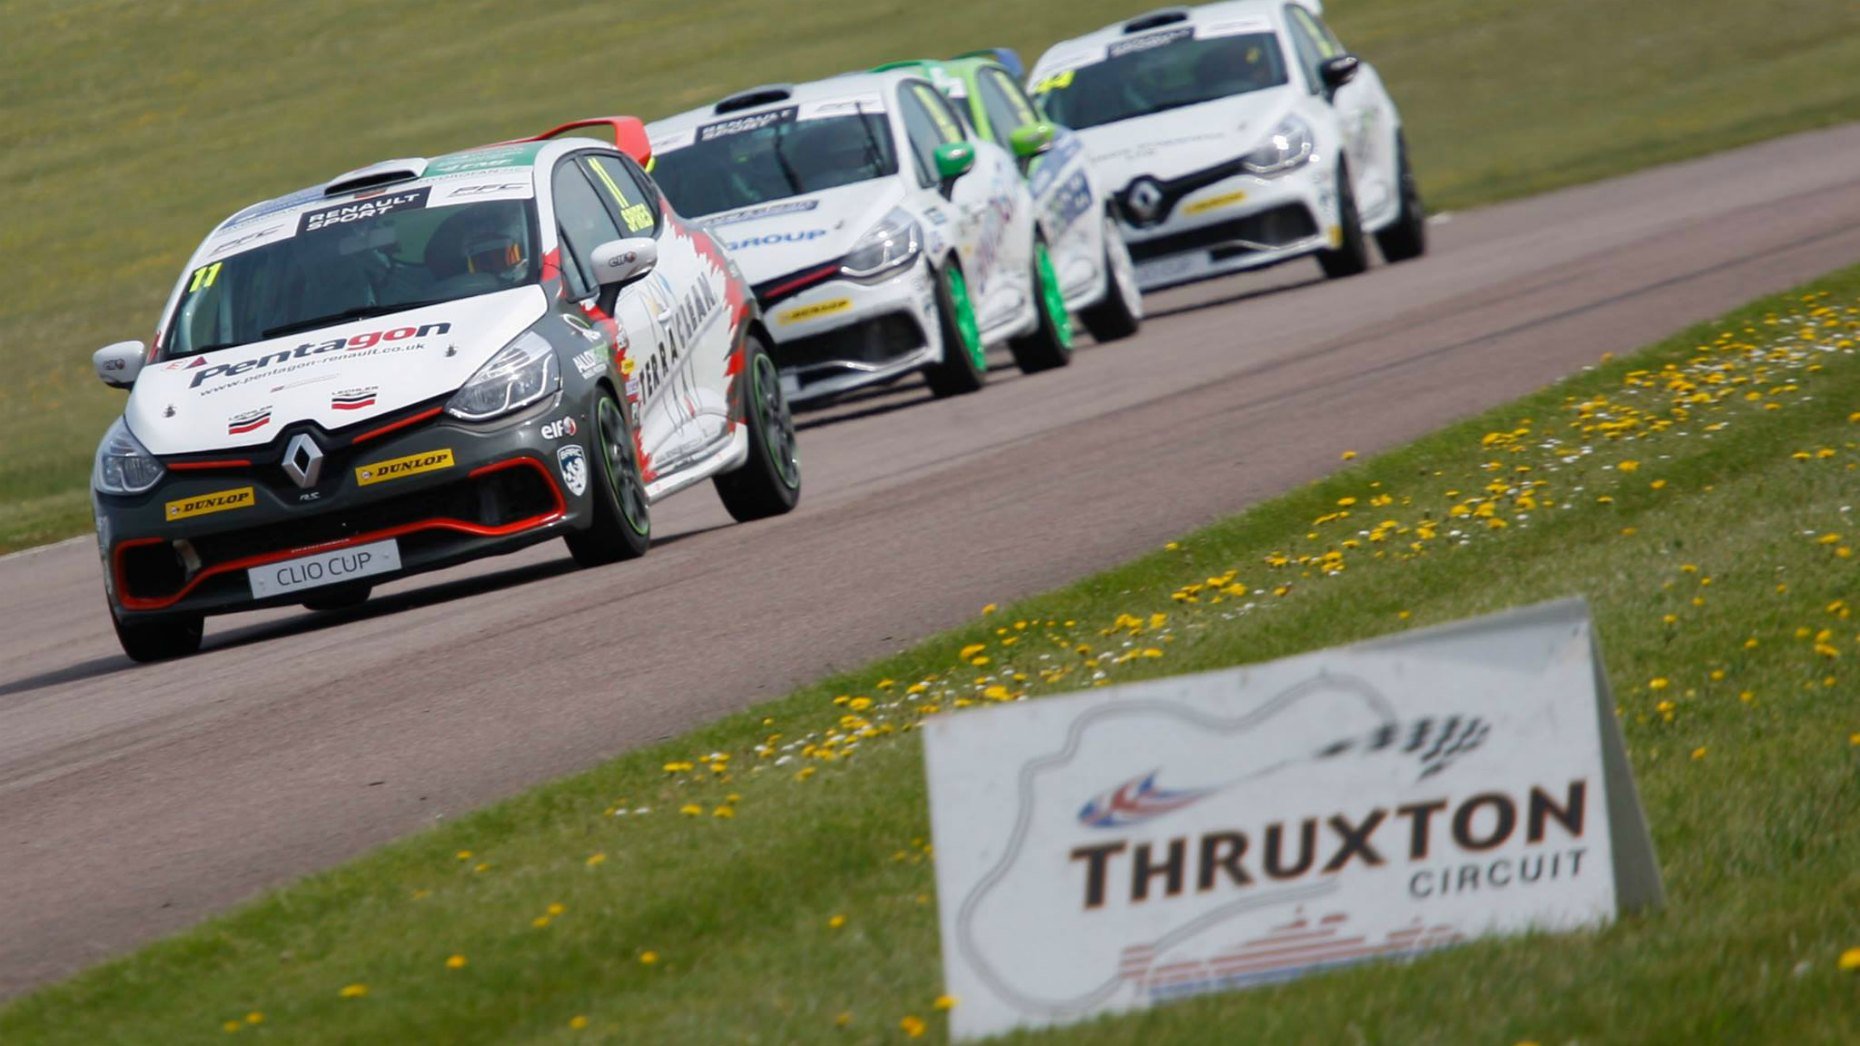 The Lincoln Car Team came 5th and 6th in their races at Thruxton on Sunday. Photo: Jakob Ebrey Photography